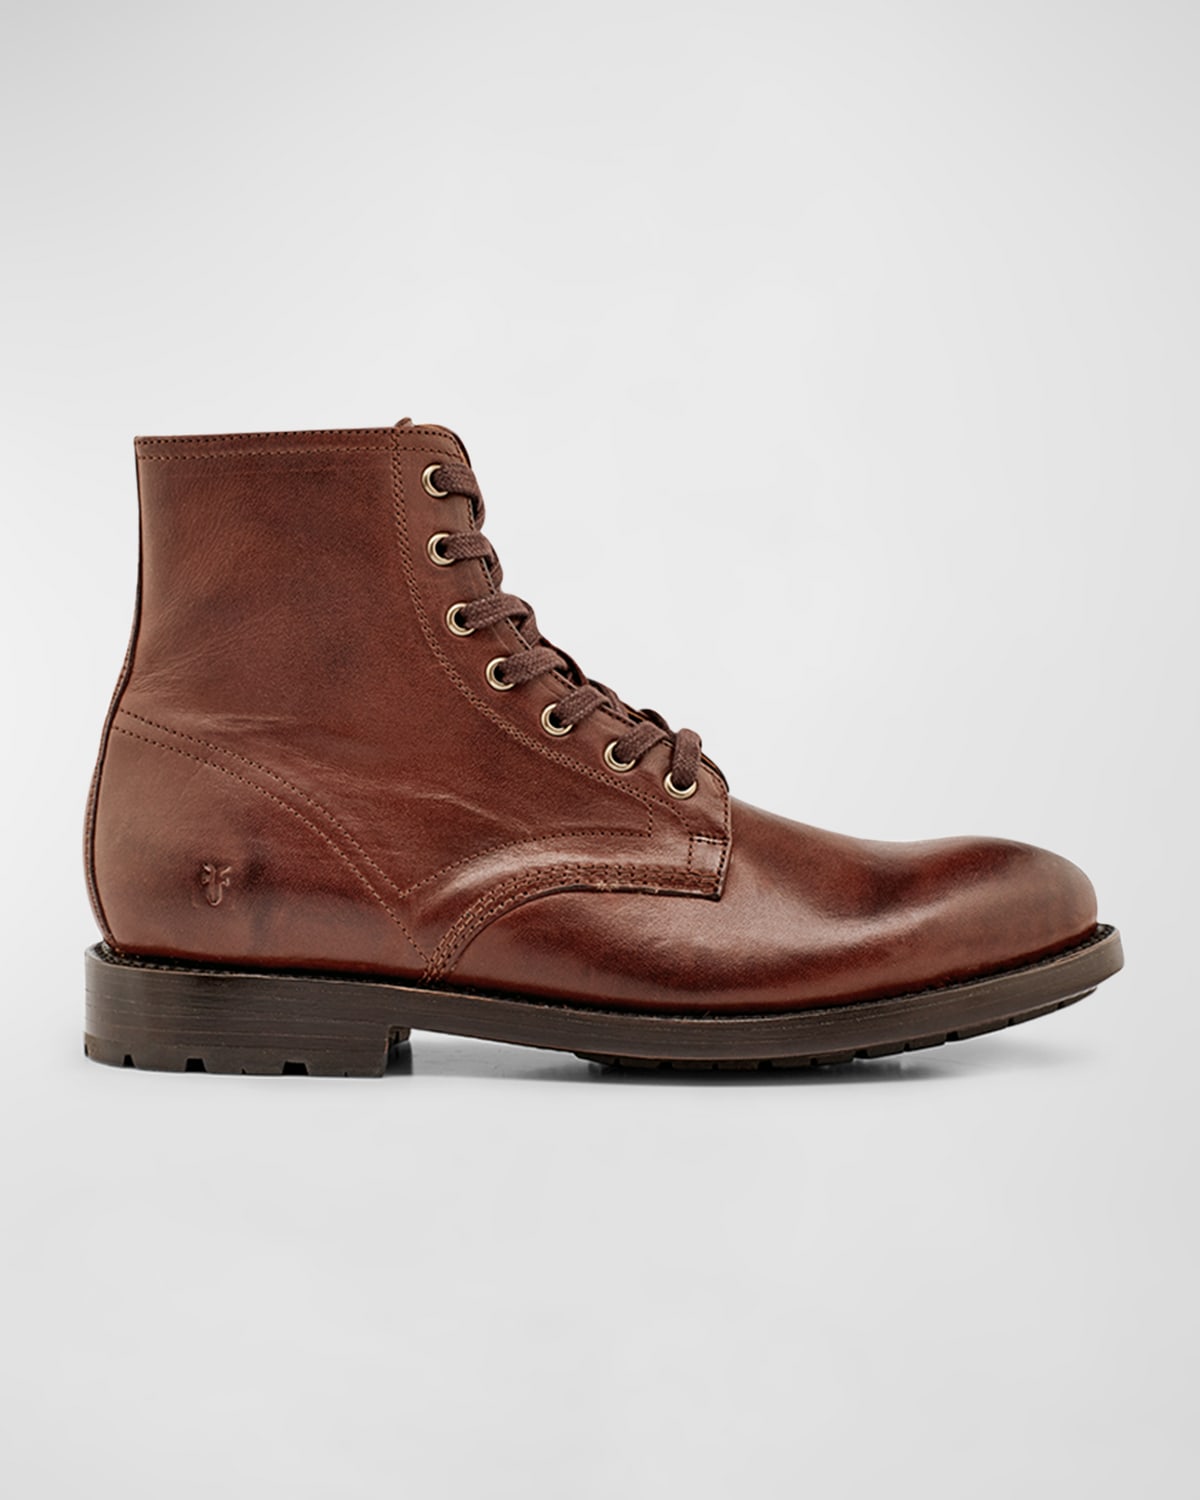 FRYE MEN'S BOWERY LACE-UP LEATHER BOOTS